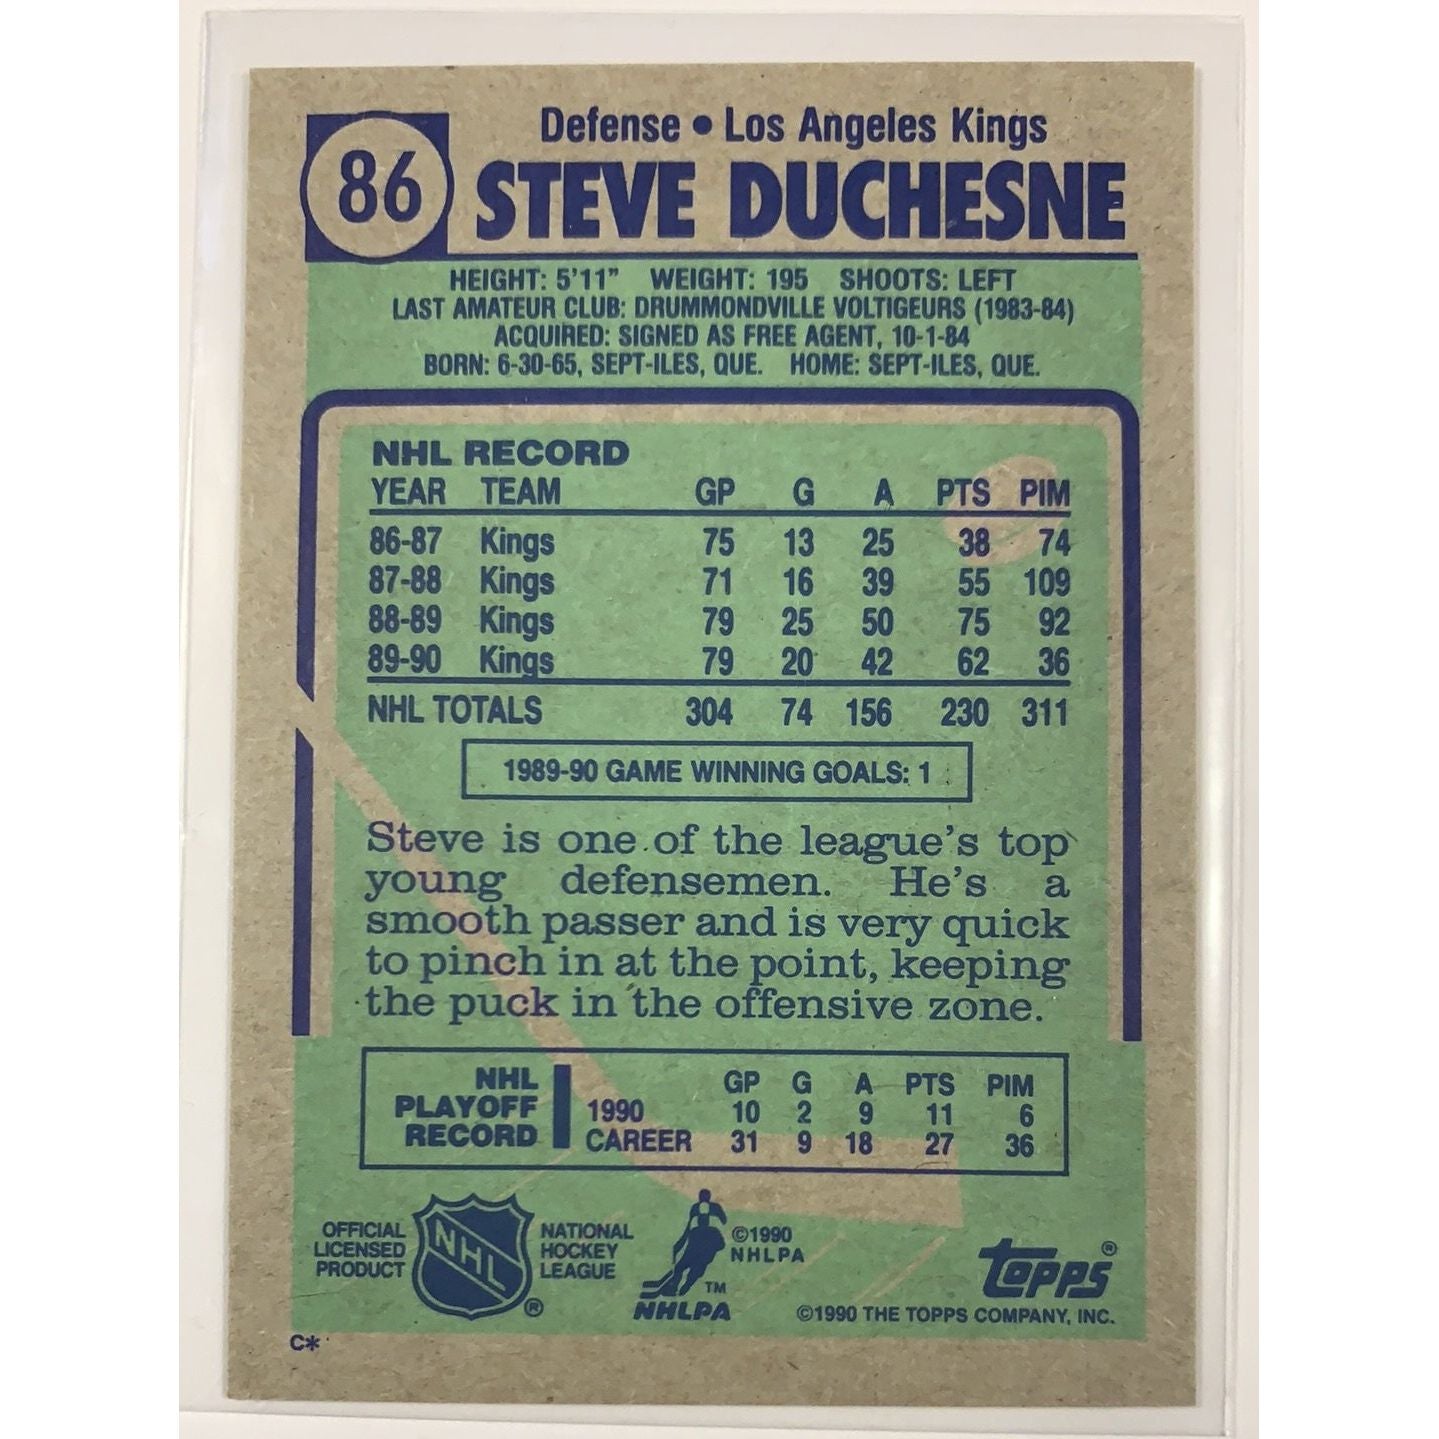  1990 Topps Steve Duschene In Person Auto  Local Legends Cards & Collectibles